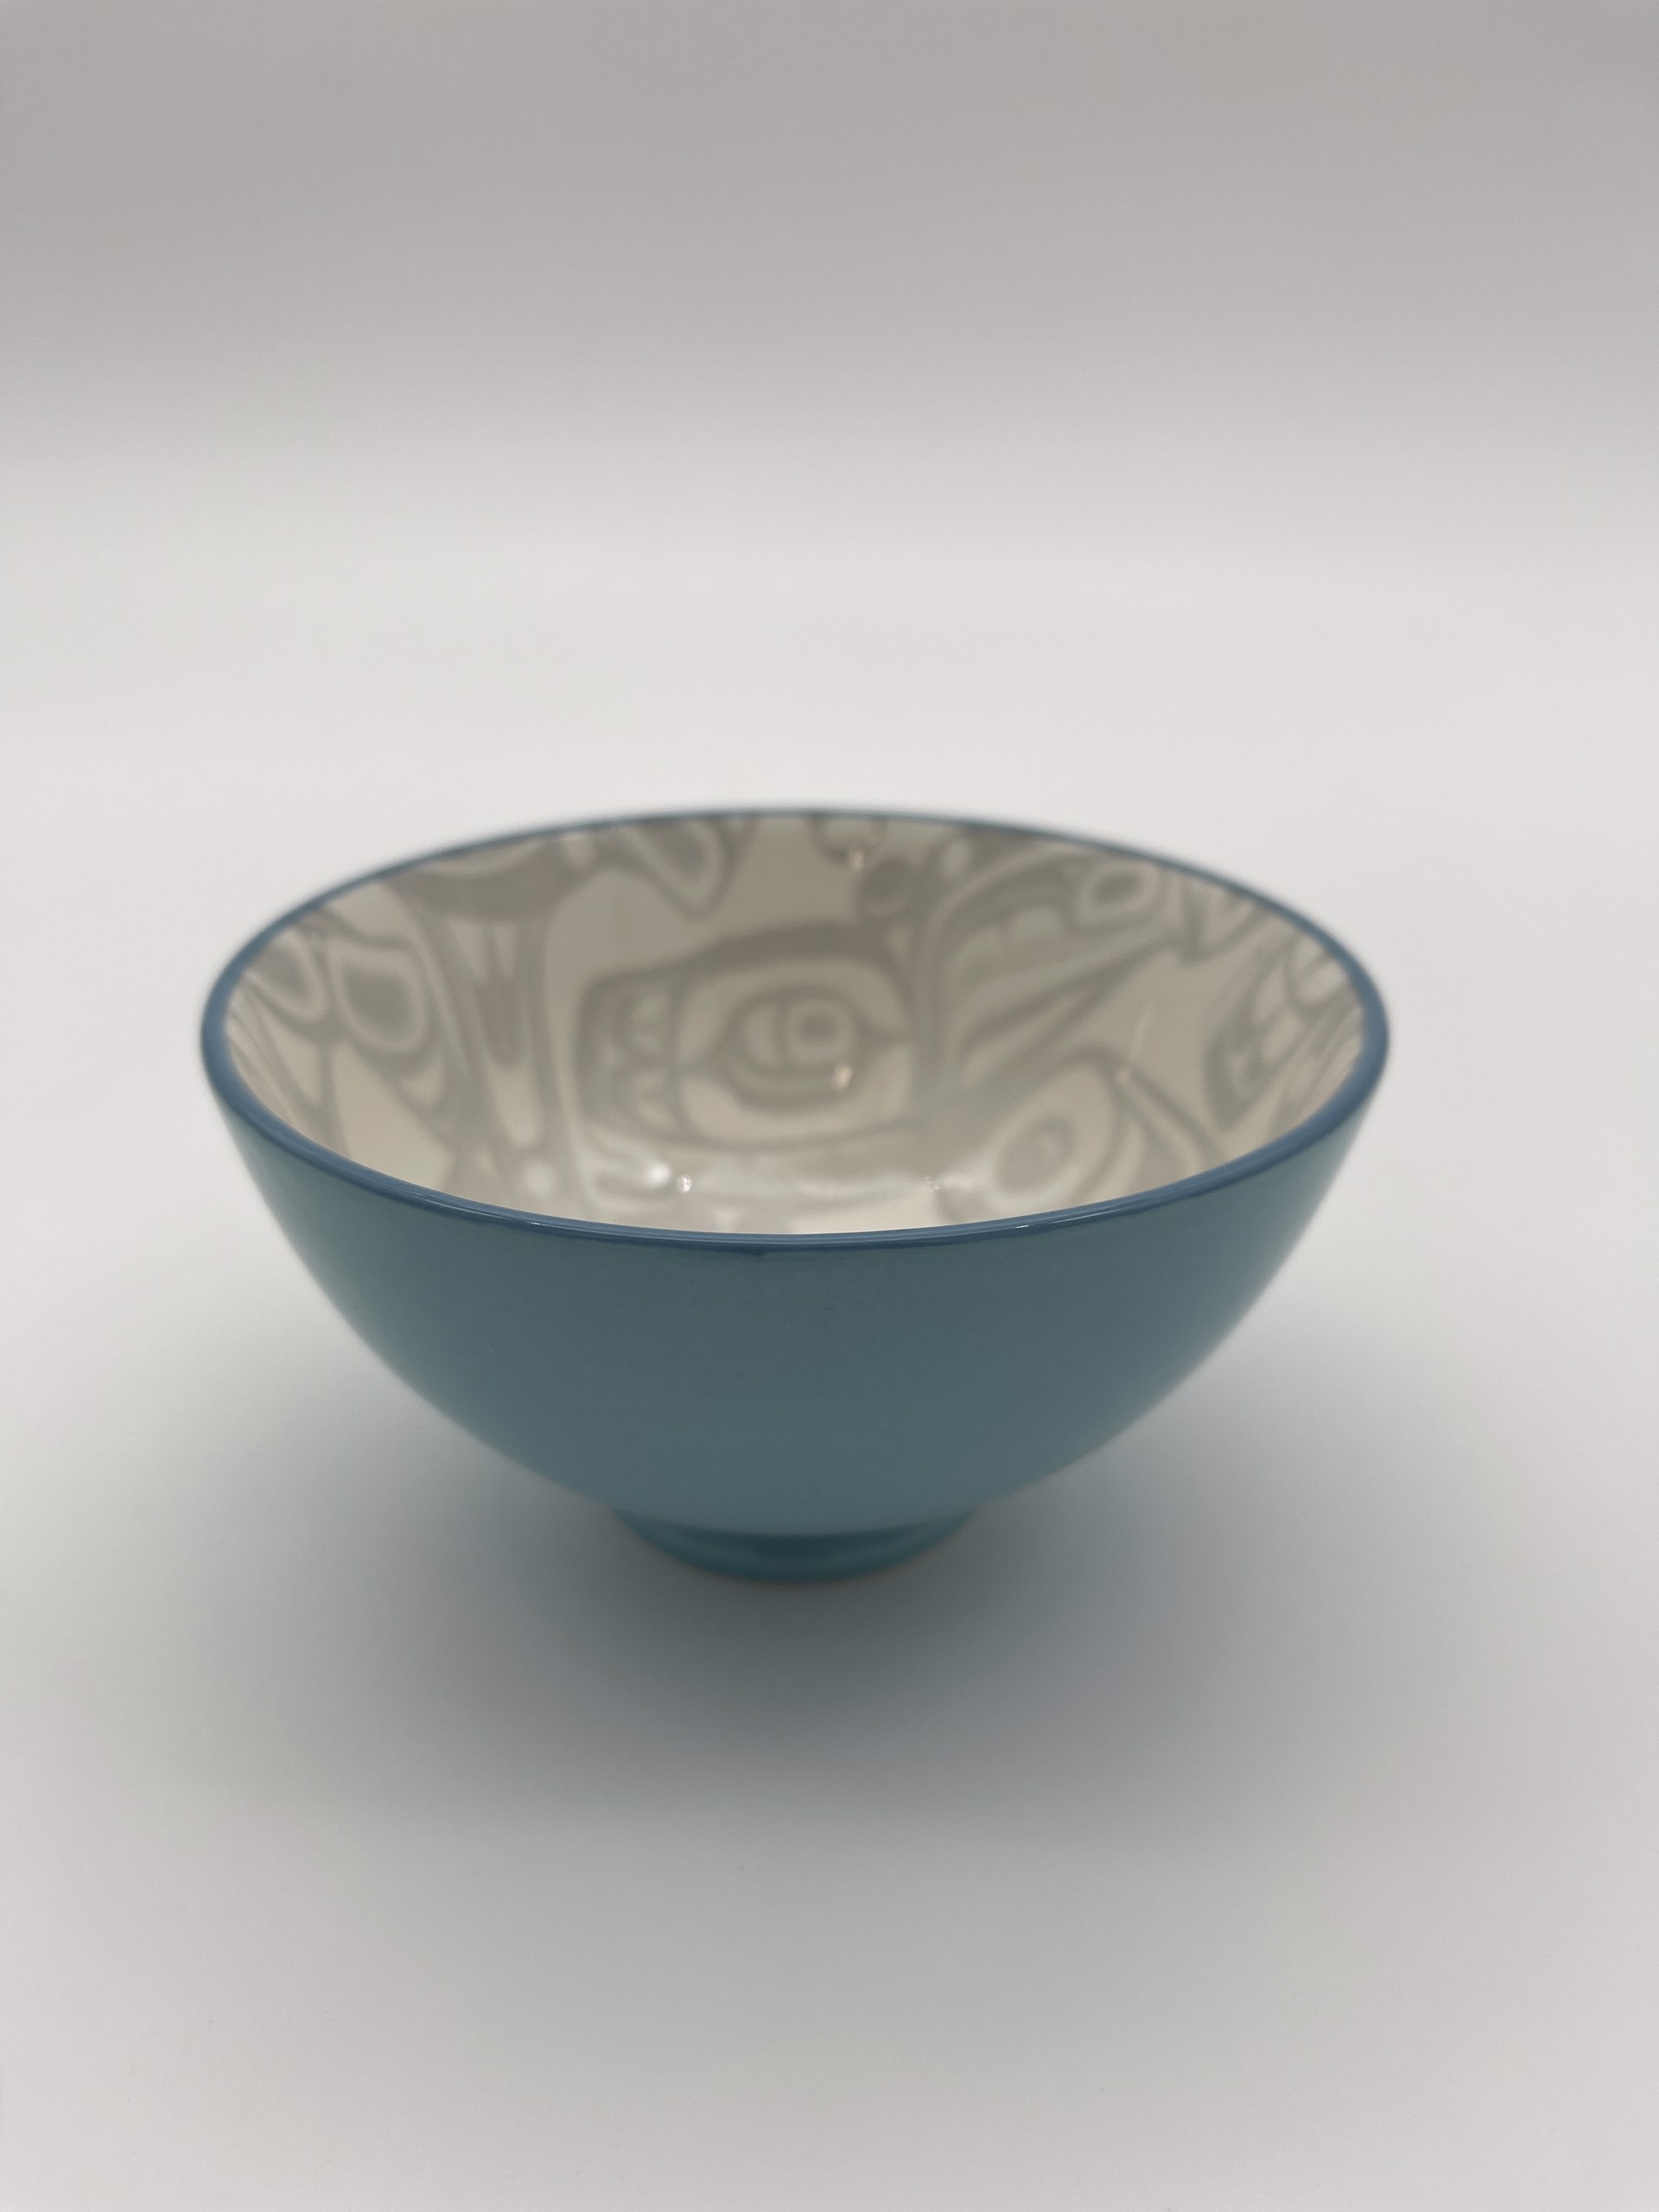 Orca Small Bowl Turquoise/Grey by Kelly Robinson